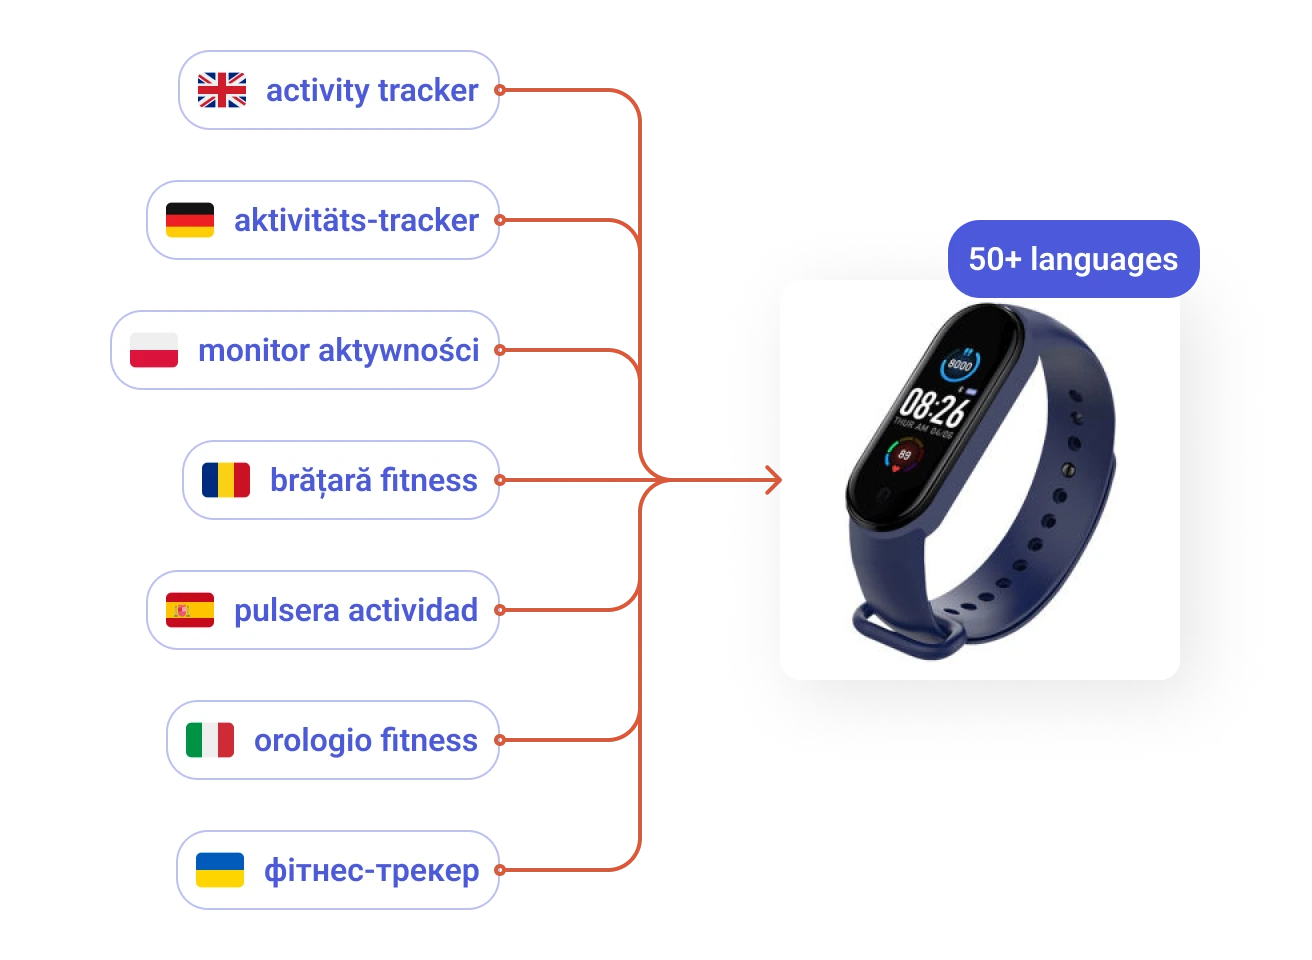 Elastic Search analyzers are trained for your catalog and user language, supports over 50+ languages. Prefixbox continously build language specific features.